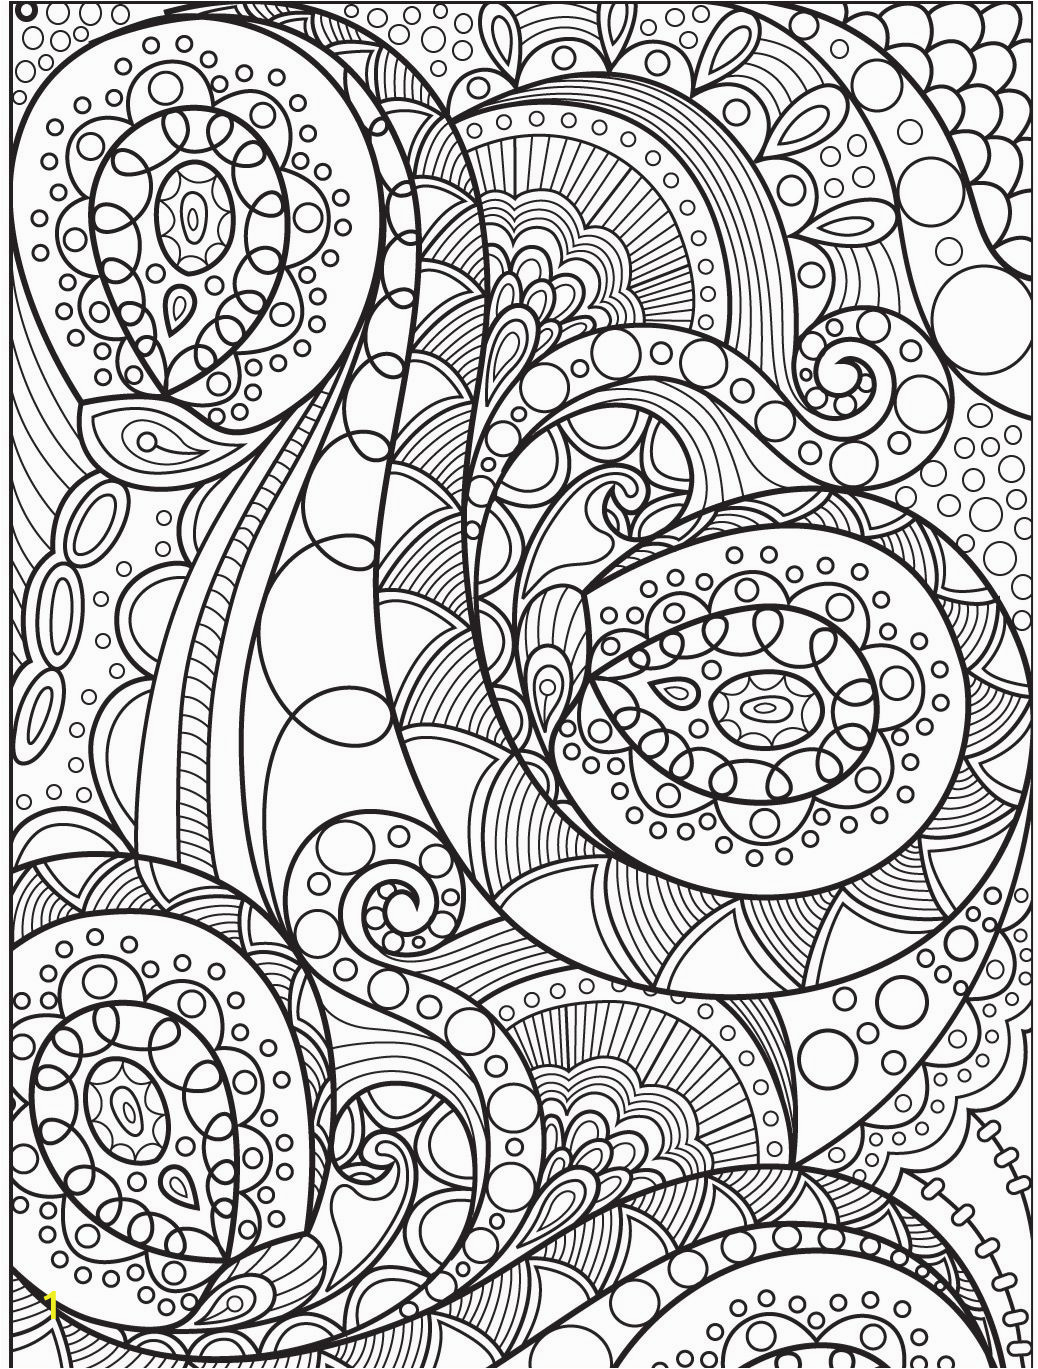 Free Printable Abstract Coloring Pages for Adults Abstract Coloring Page On Colorish Coloring Book App for